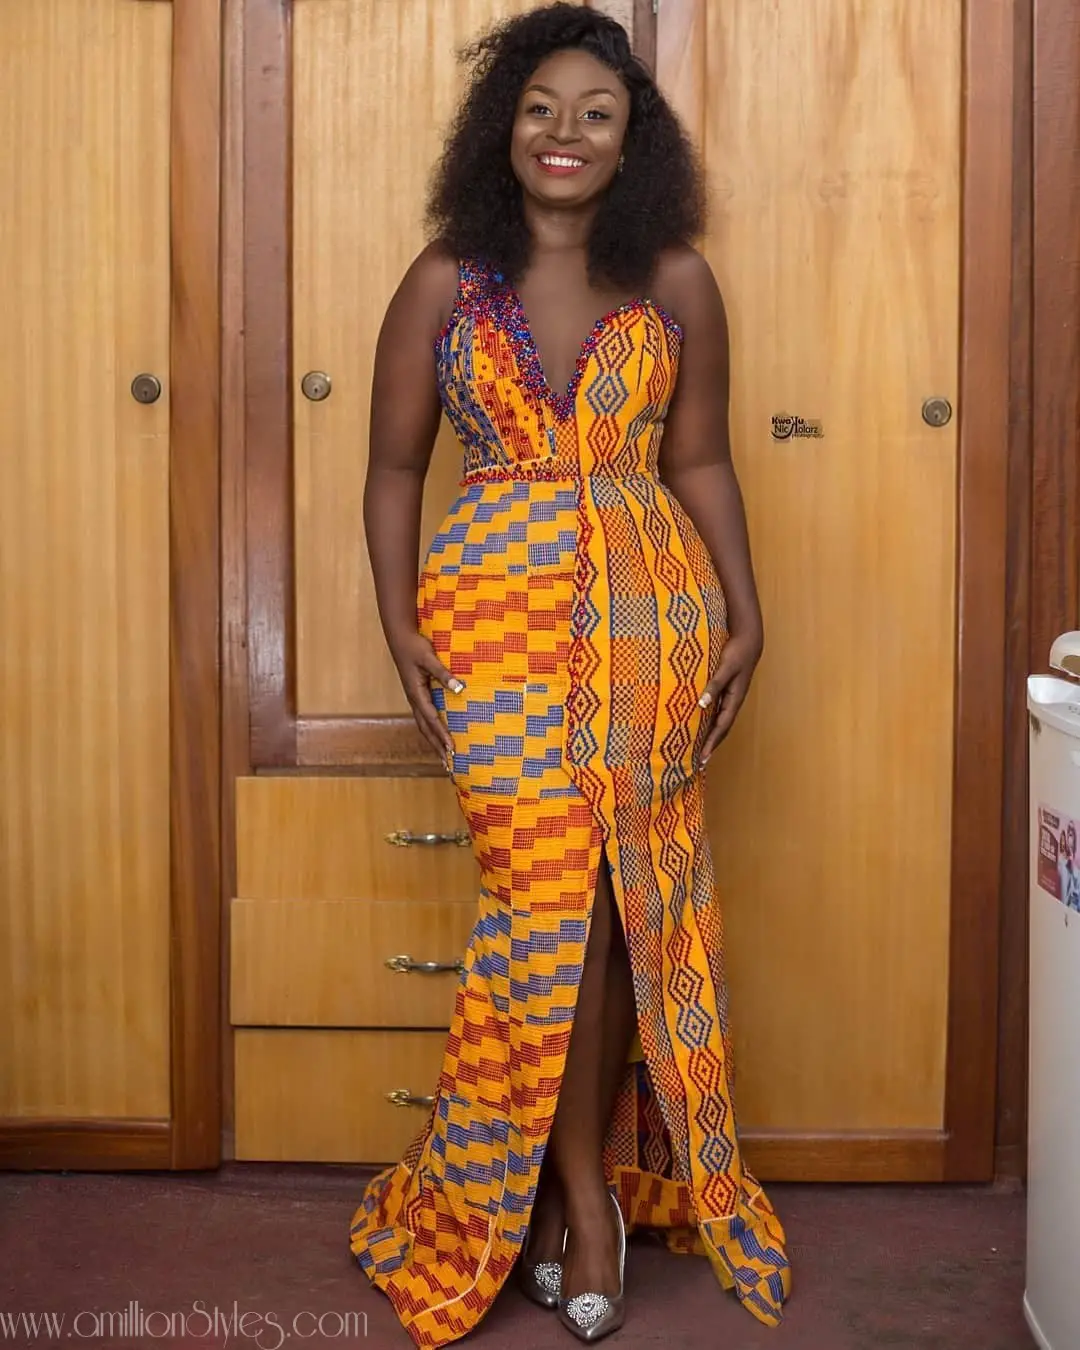 Don't You Just Love Ghanaian Kente Styles?